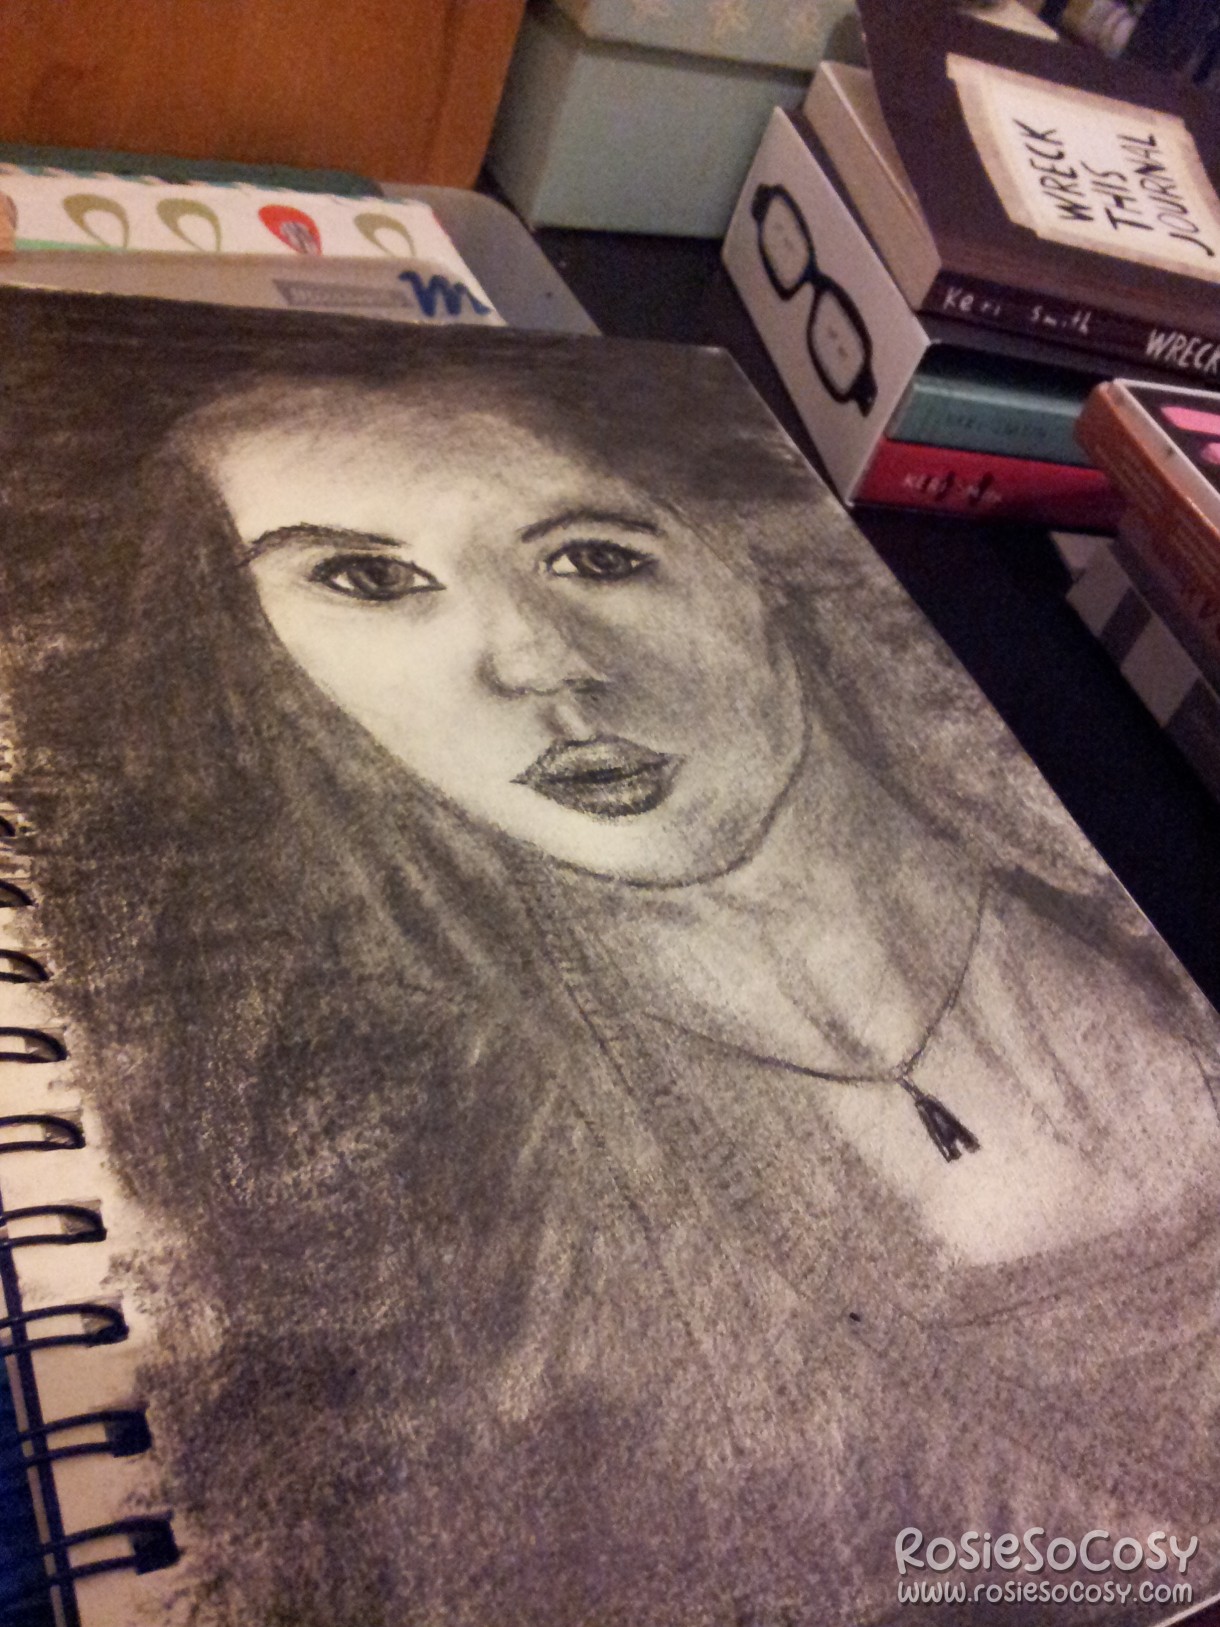 A charcoal drawing of Amy Pond (portrayed by Karen Gillan) in Doctor Who. Amy is looking at the camera. She has big eyes and somewhat pouted lips. She is wearing a necklace with the letter A on it.